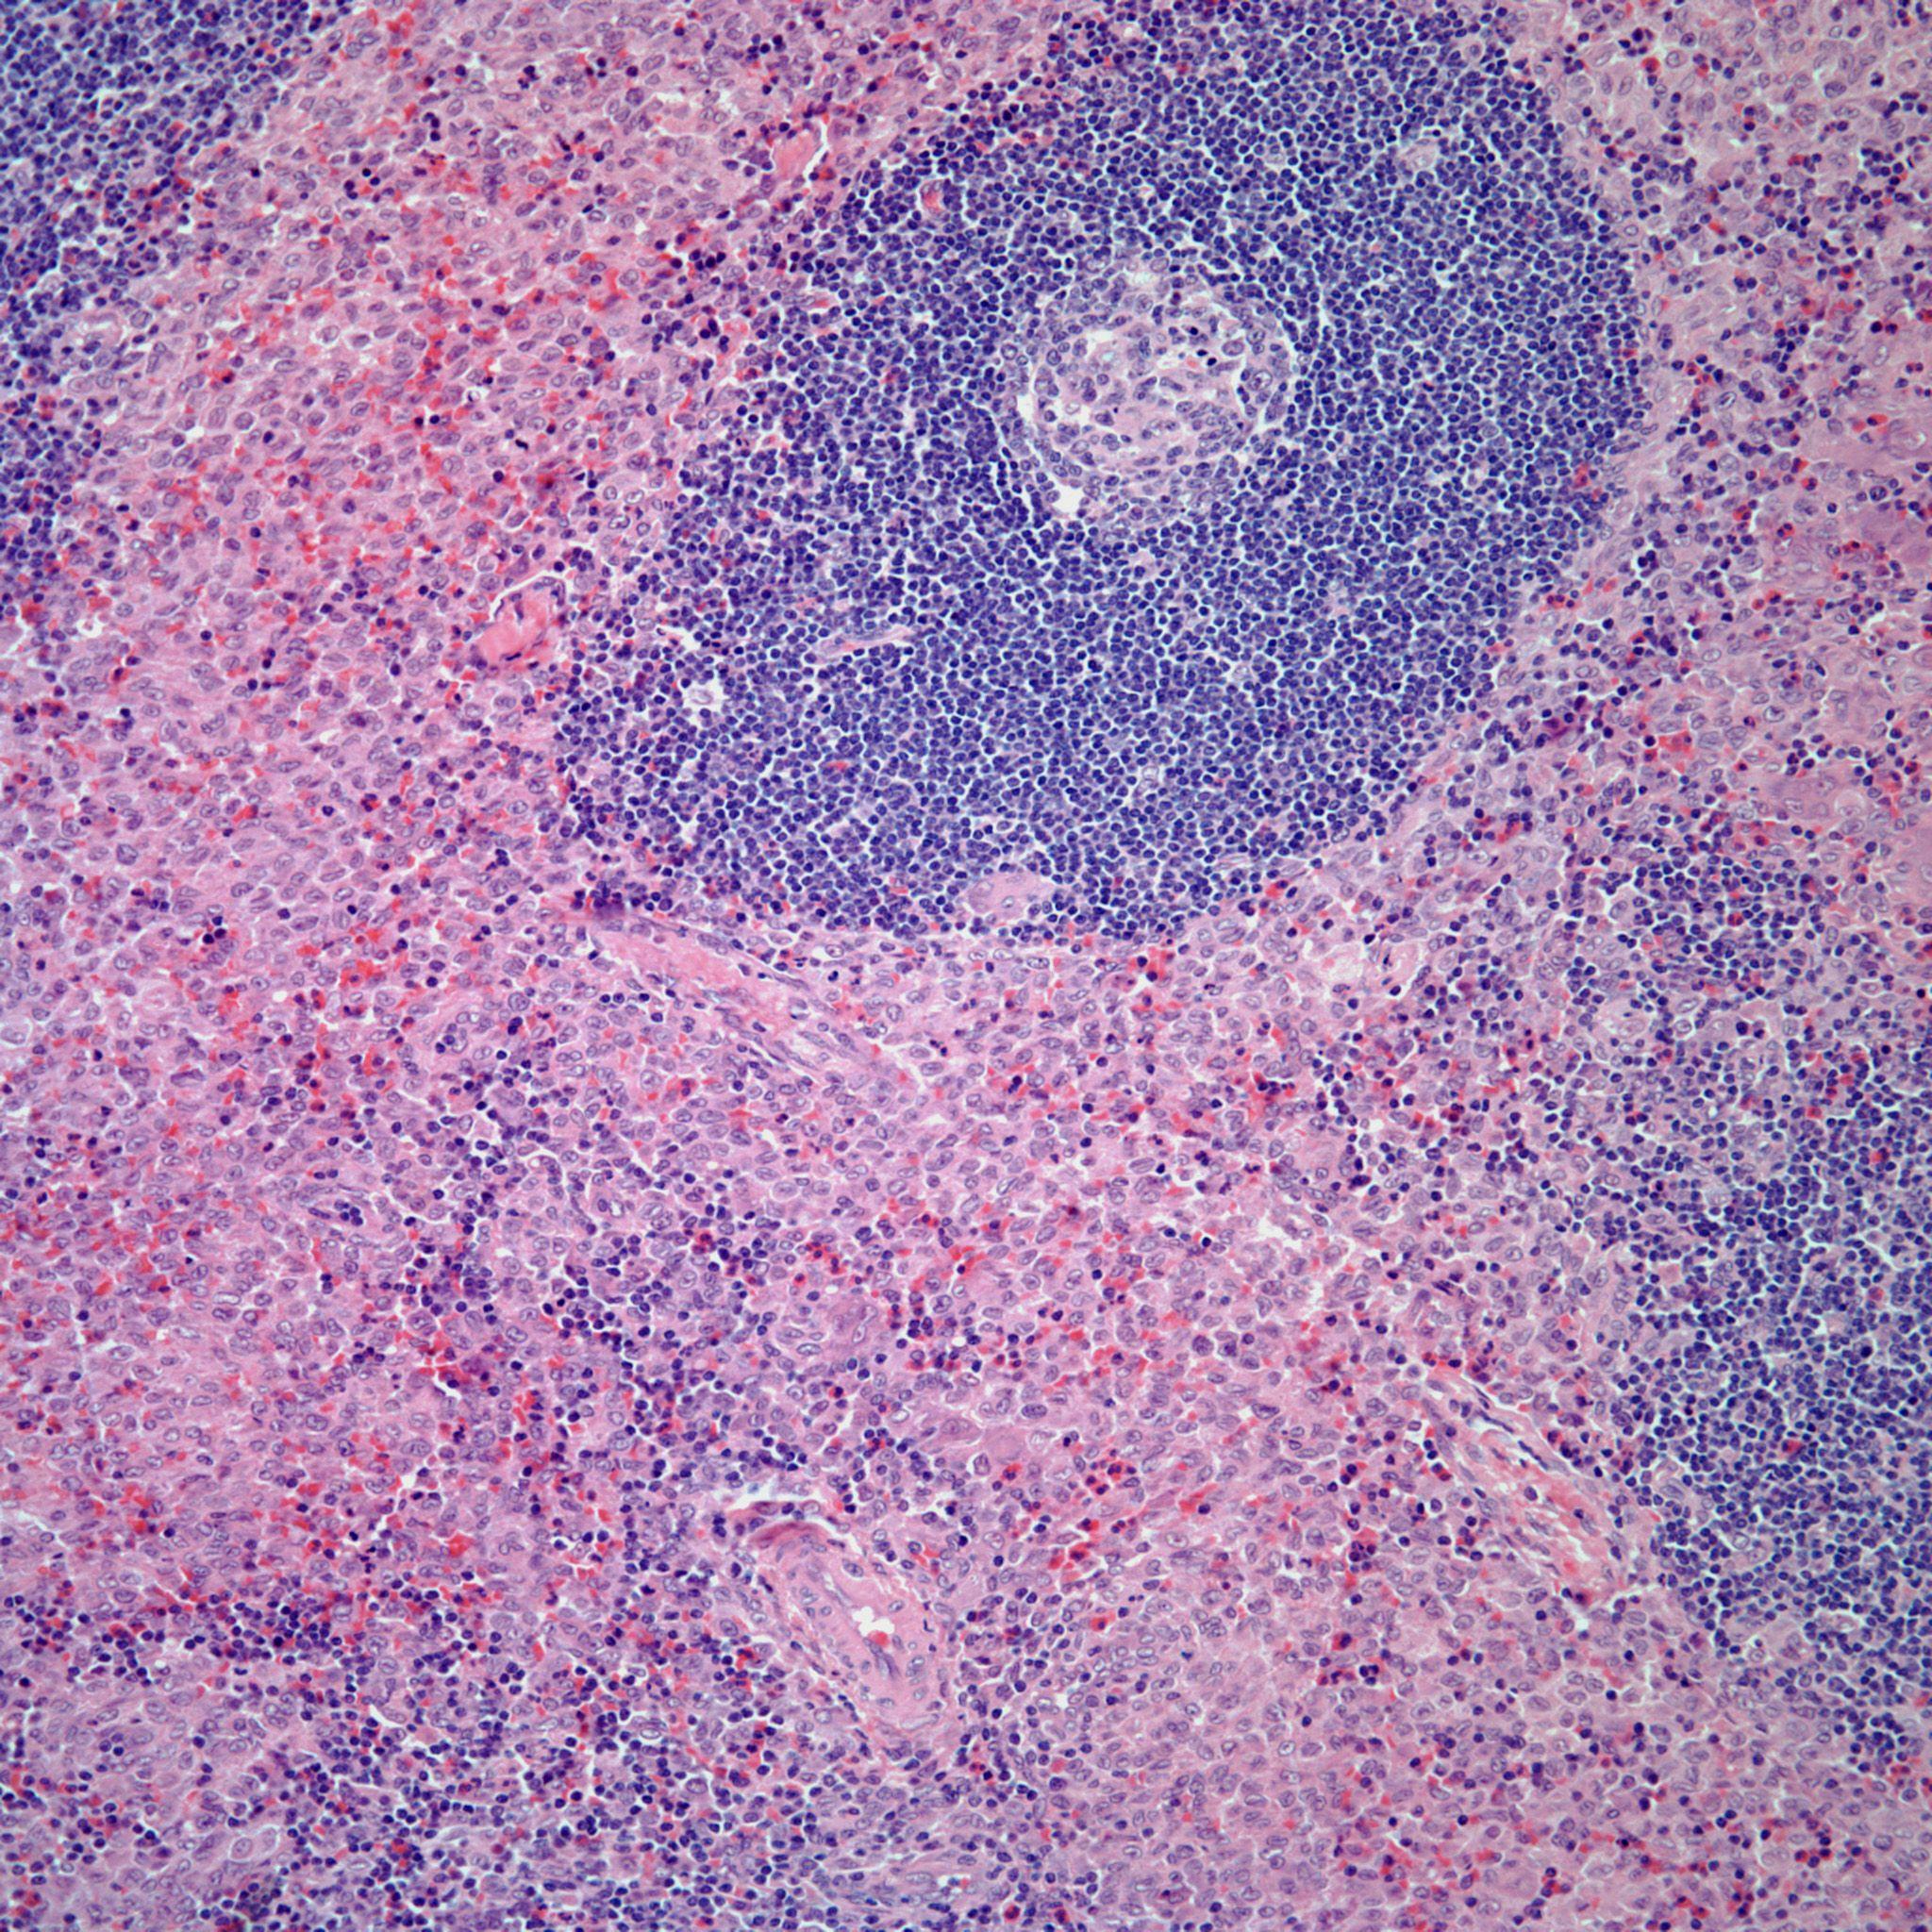 23-Year-Old Woman Presents With Cervical Lymphadenopathy